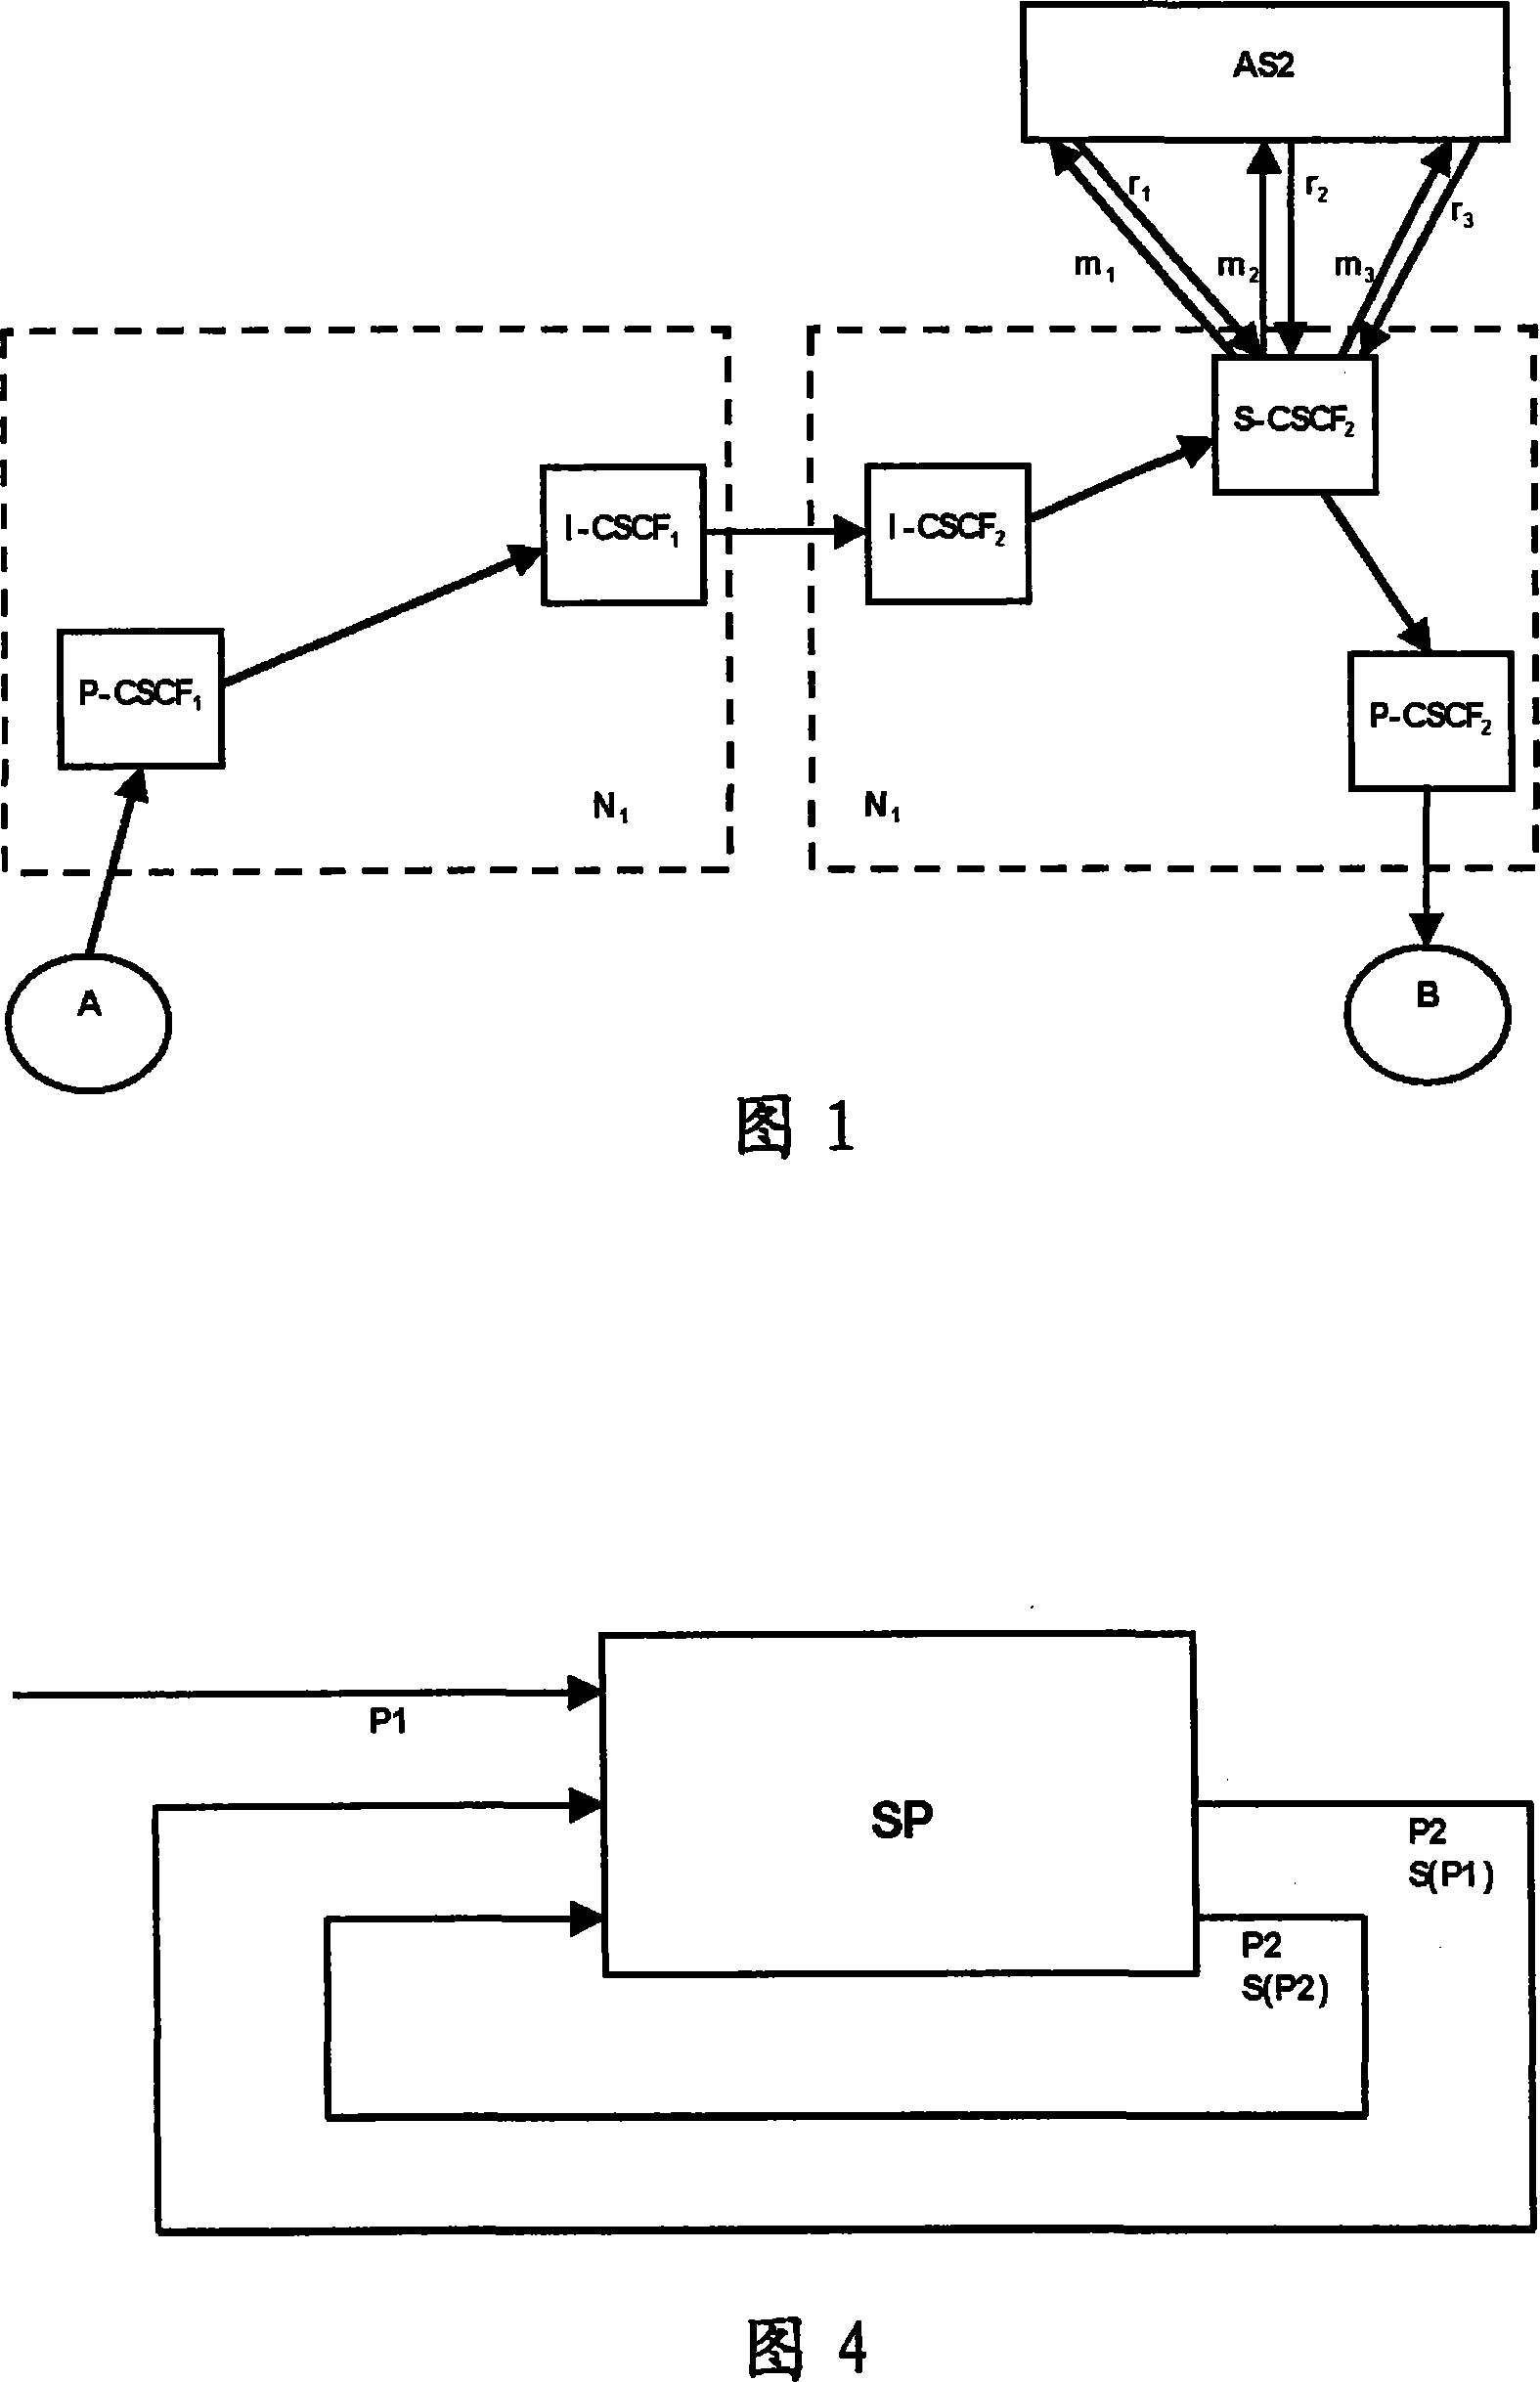 Detection of loops within a sip signalling proxy